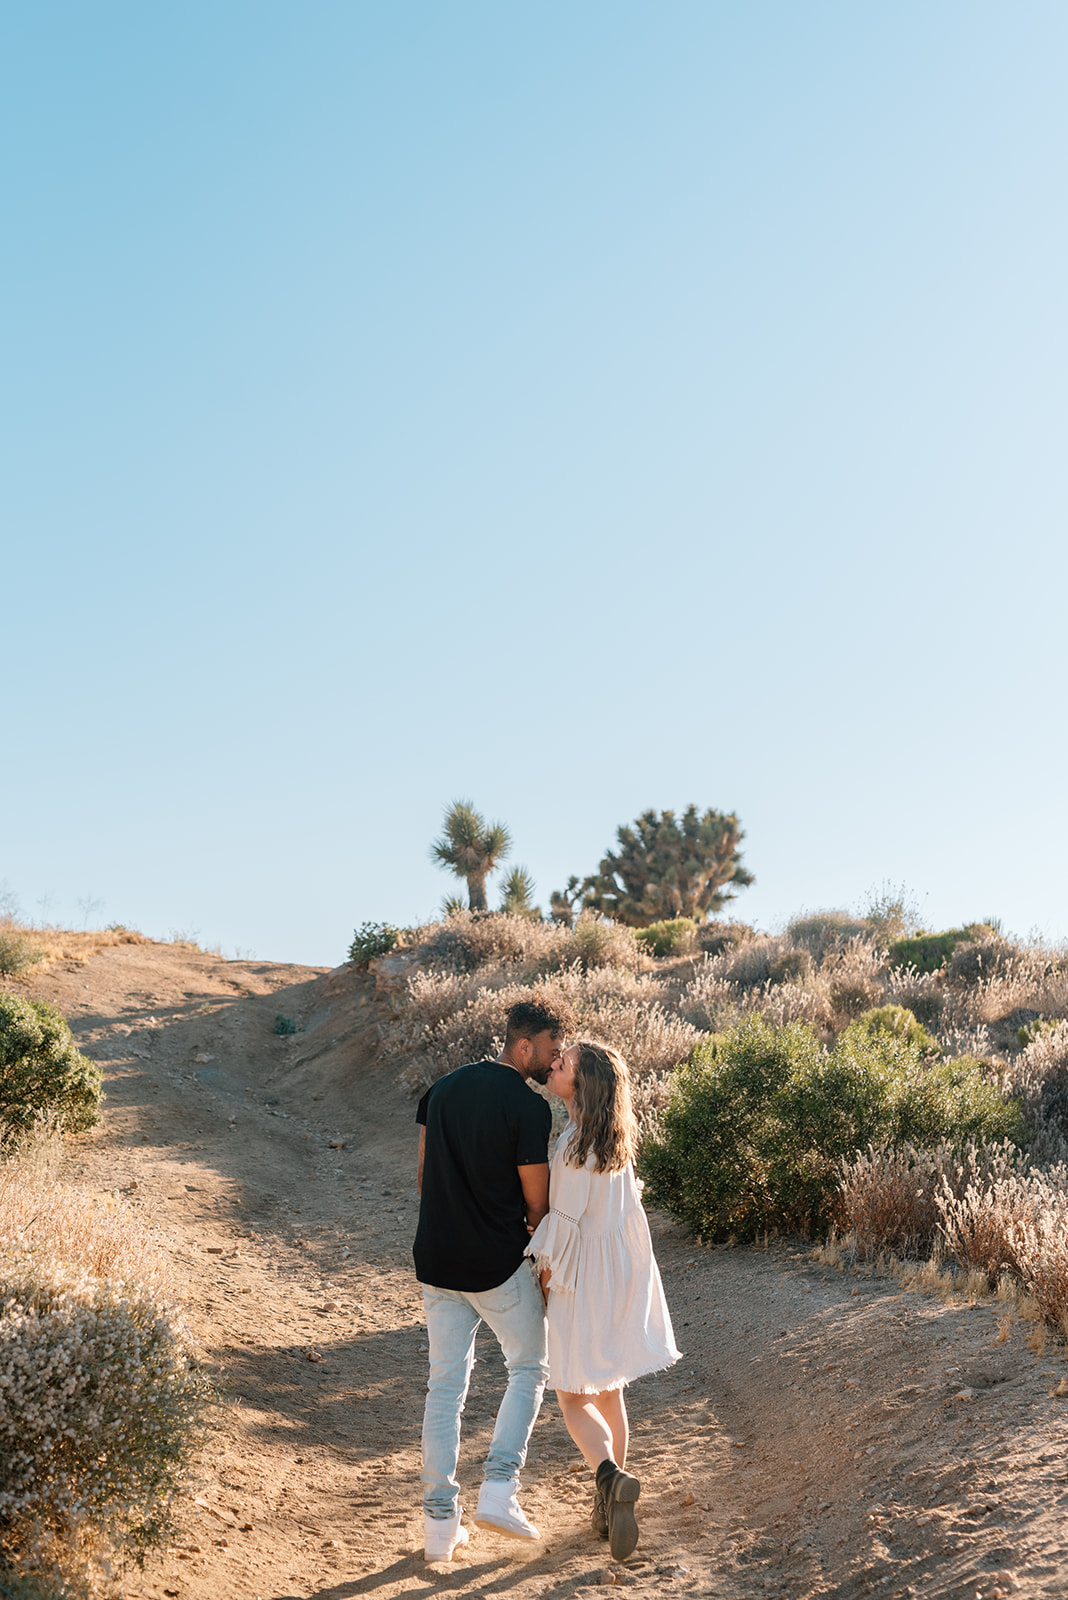 Couple walks away from the camera and into the desert